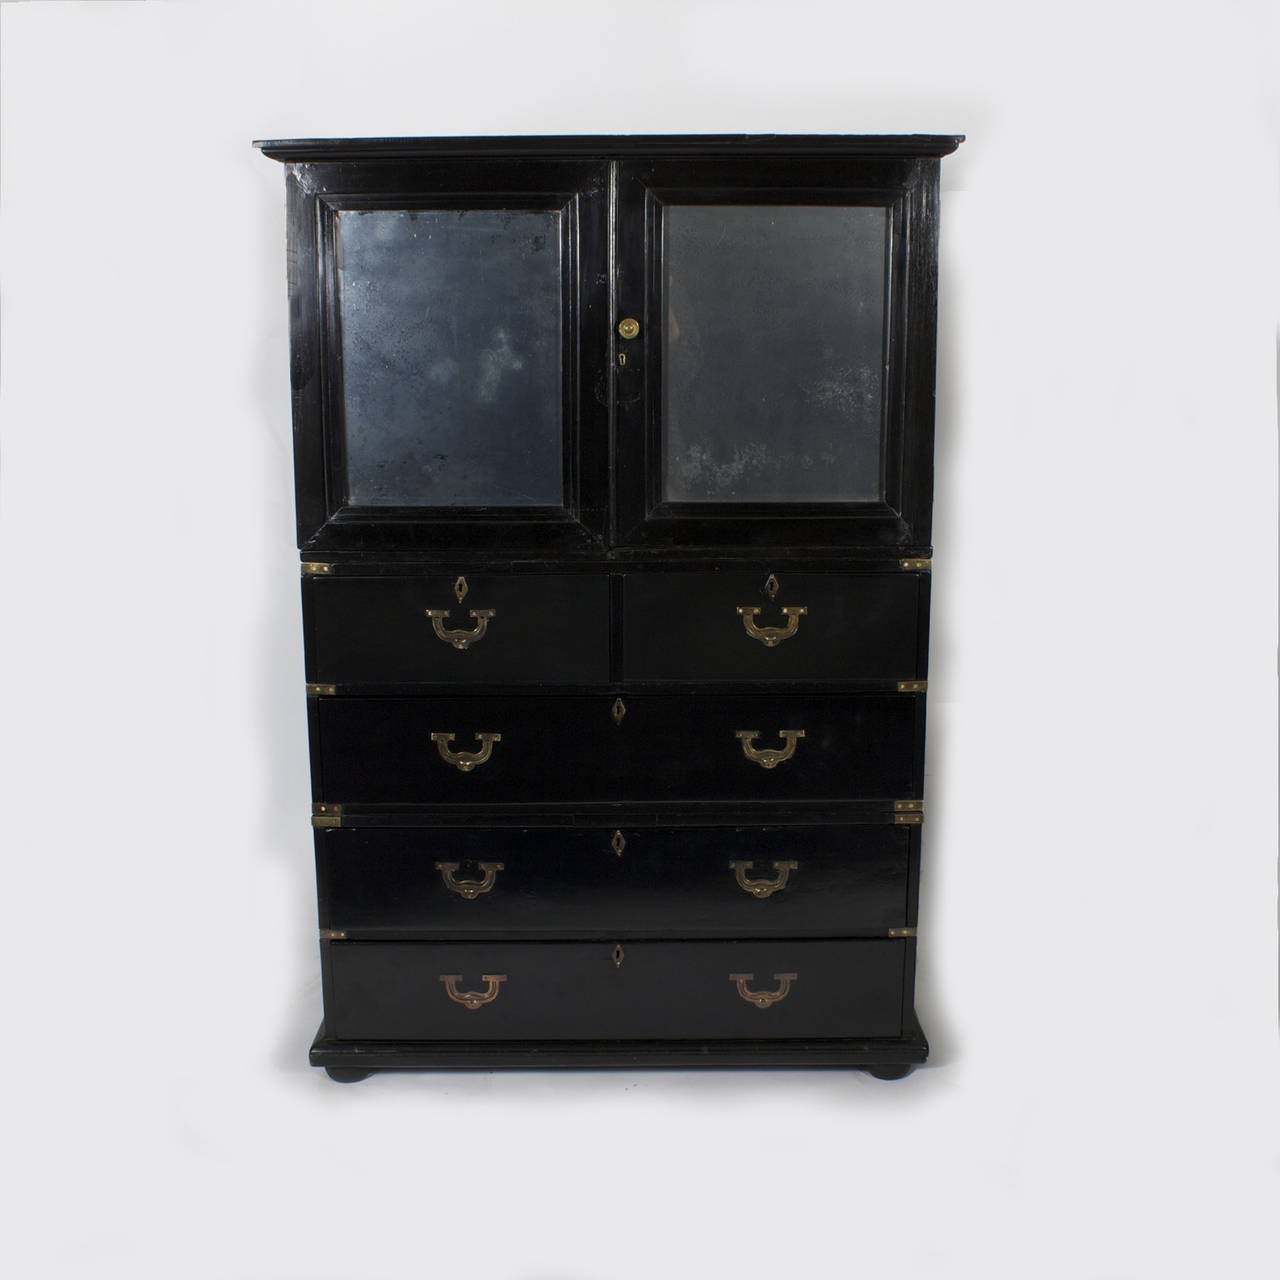 Unusual, ebonized combination cupboard or cabinet and chest of drawers, executed in Classic Campaign form. Two paneled mirror doors with time worn distress over four drawers with recesses brass pulls, original brass side handles and corner brackets,